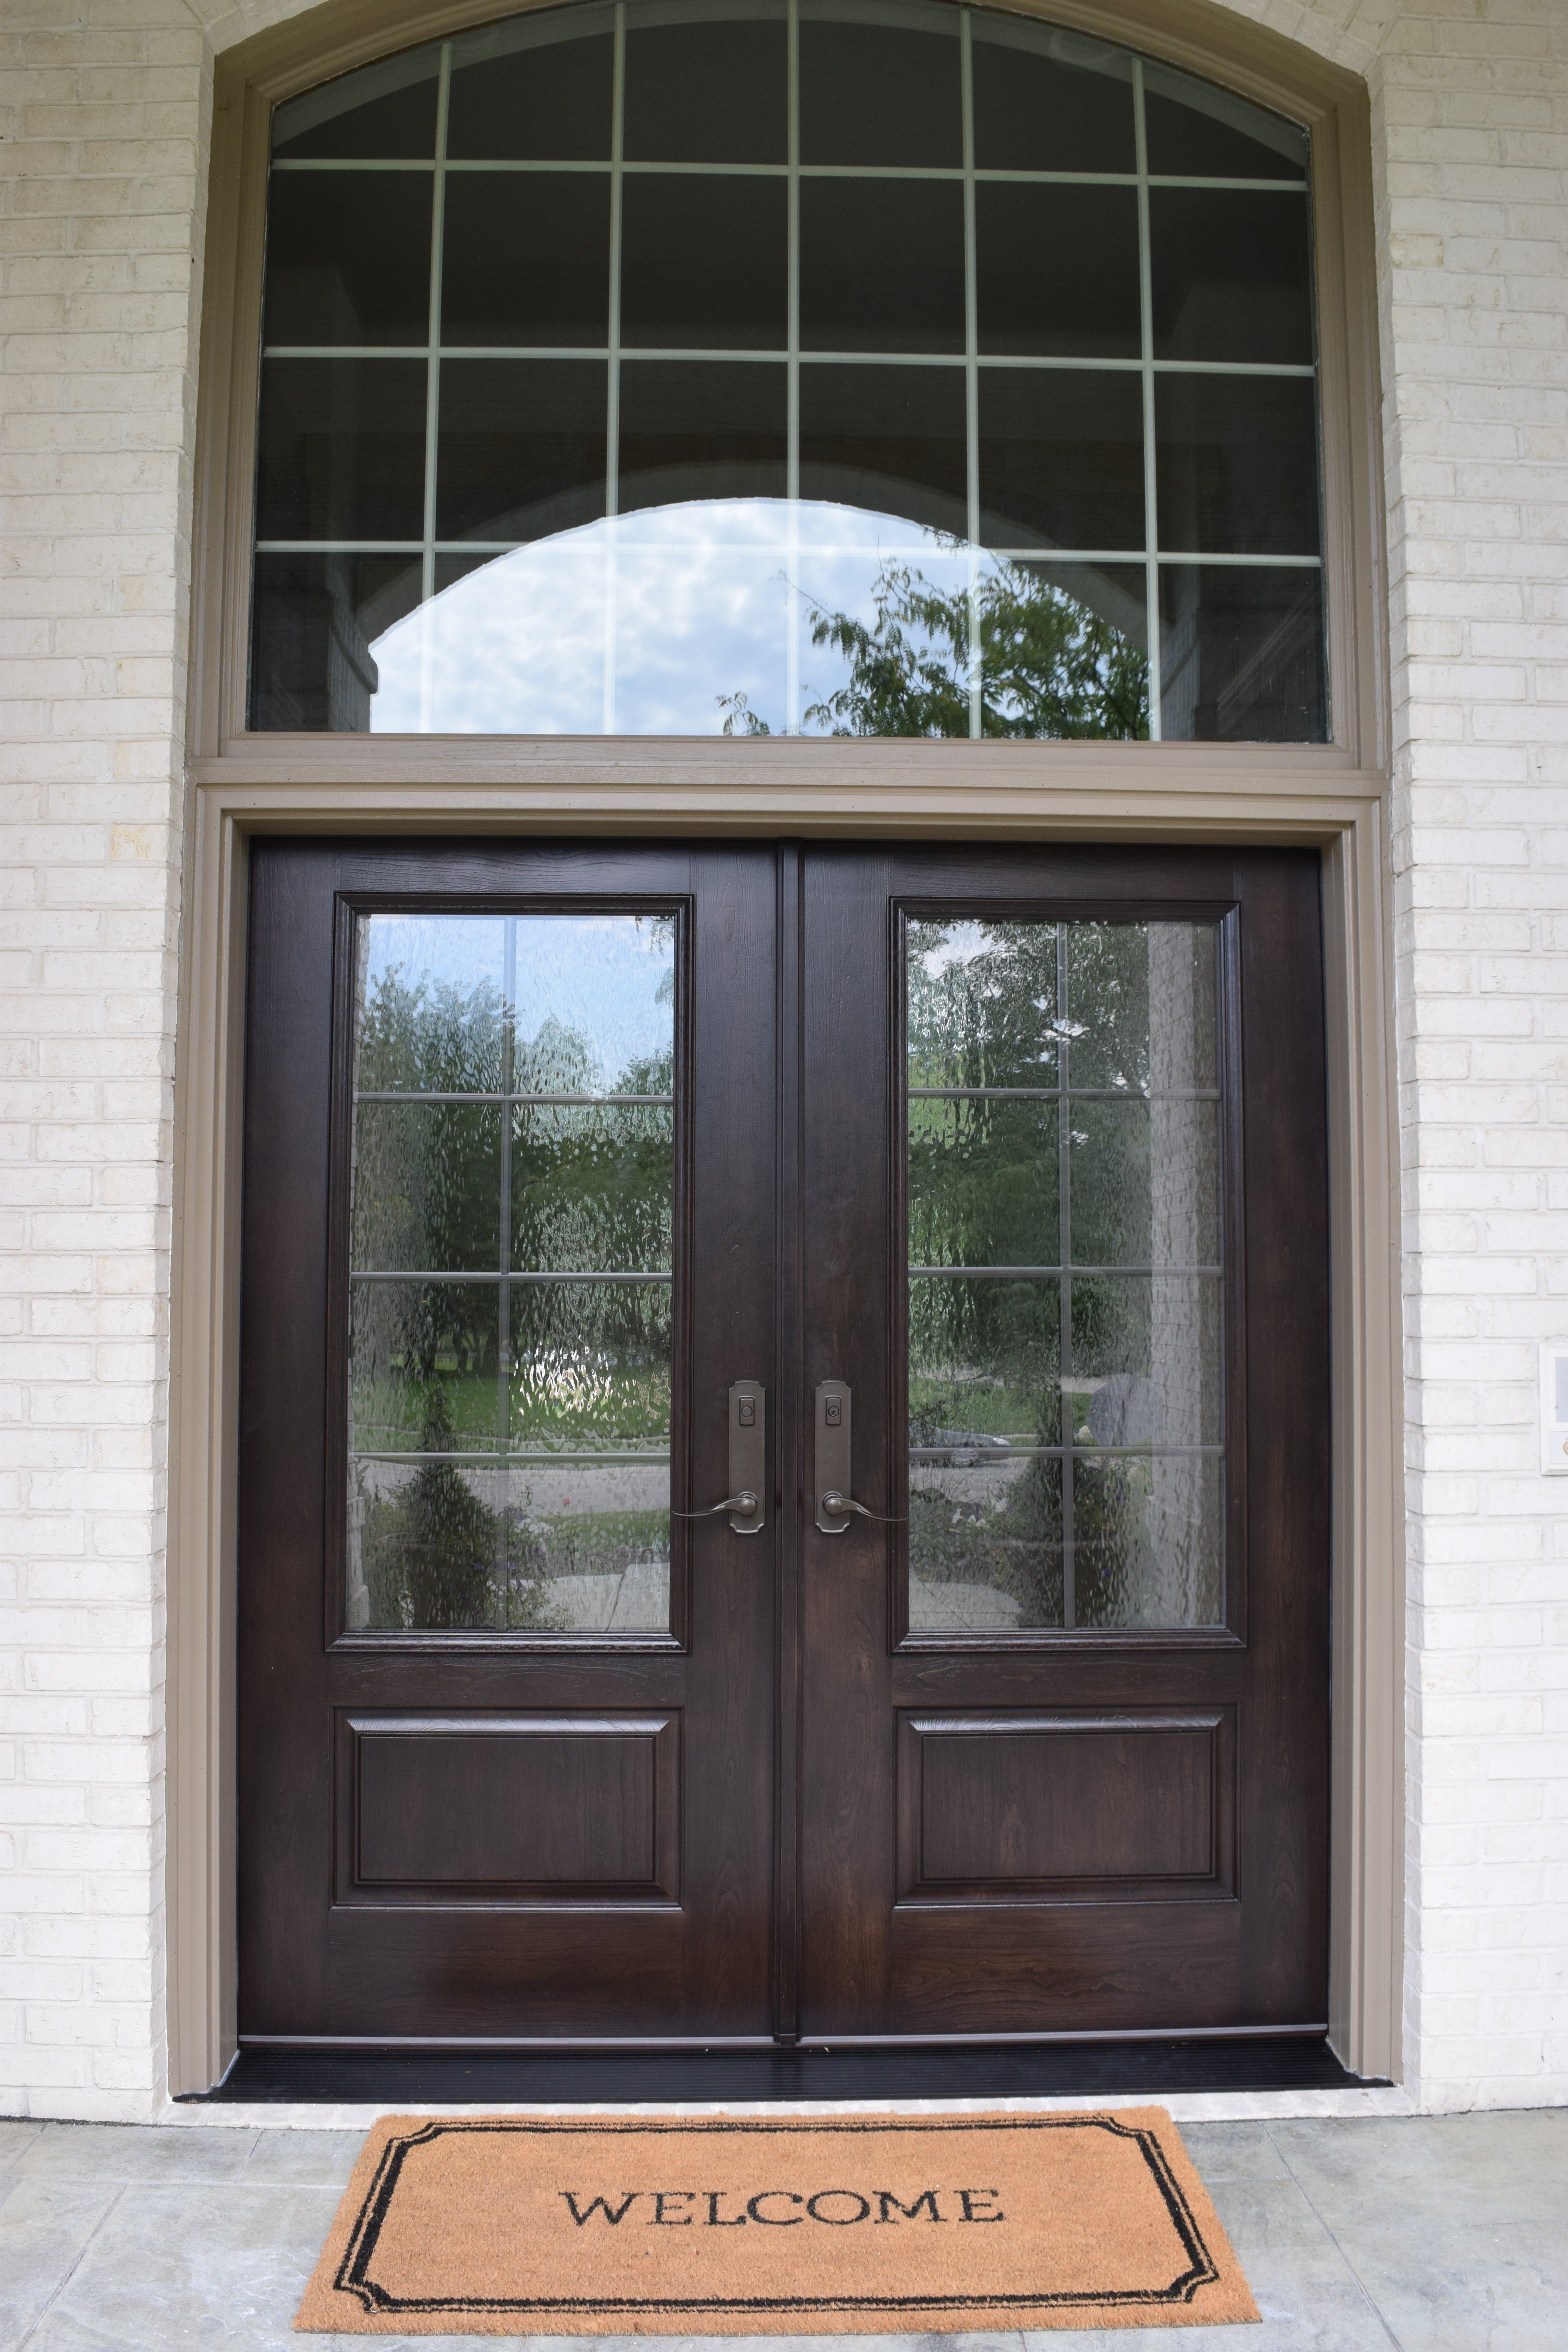 Bold and Bright Fiberglass Entry Doors: What Defines a Home